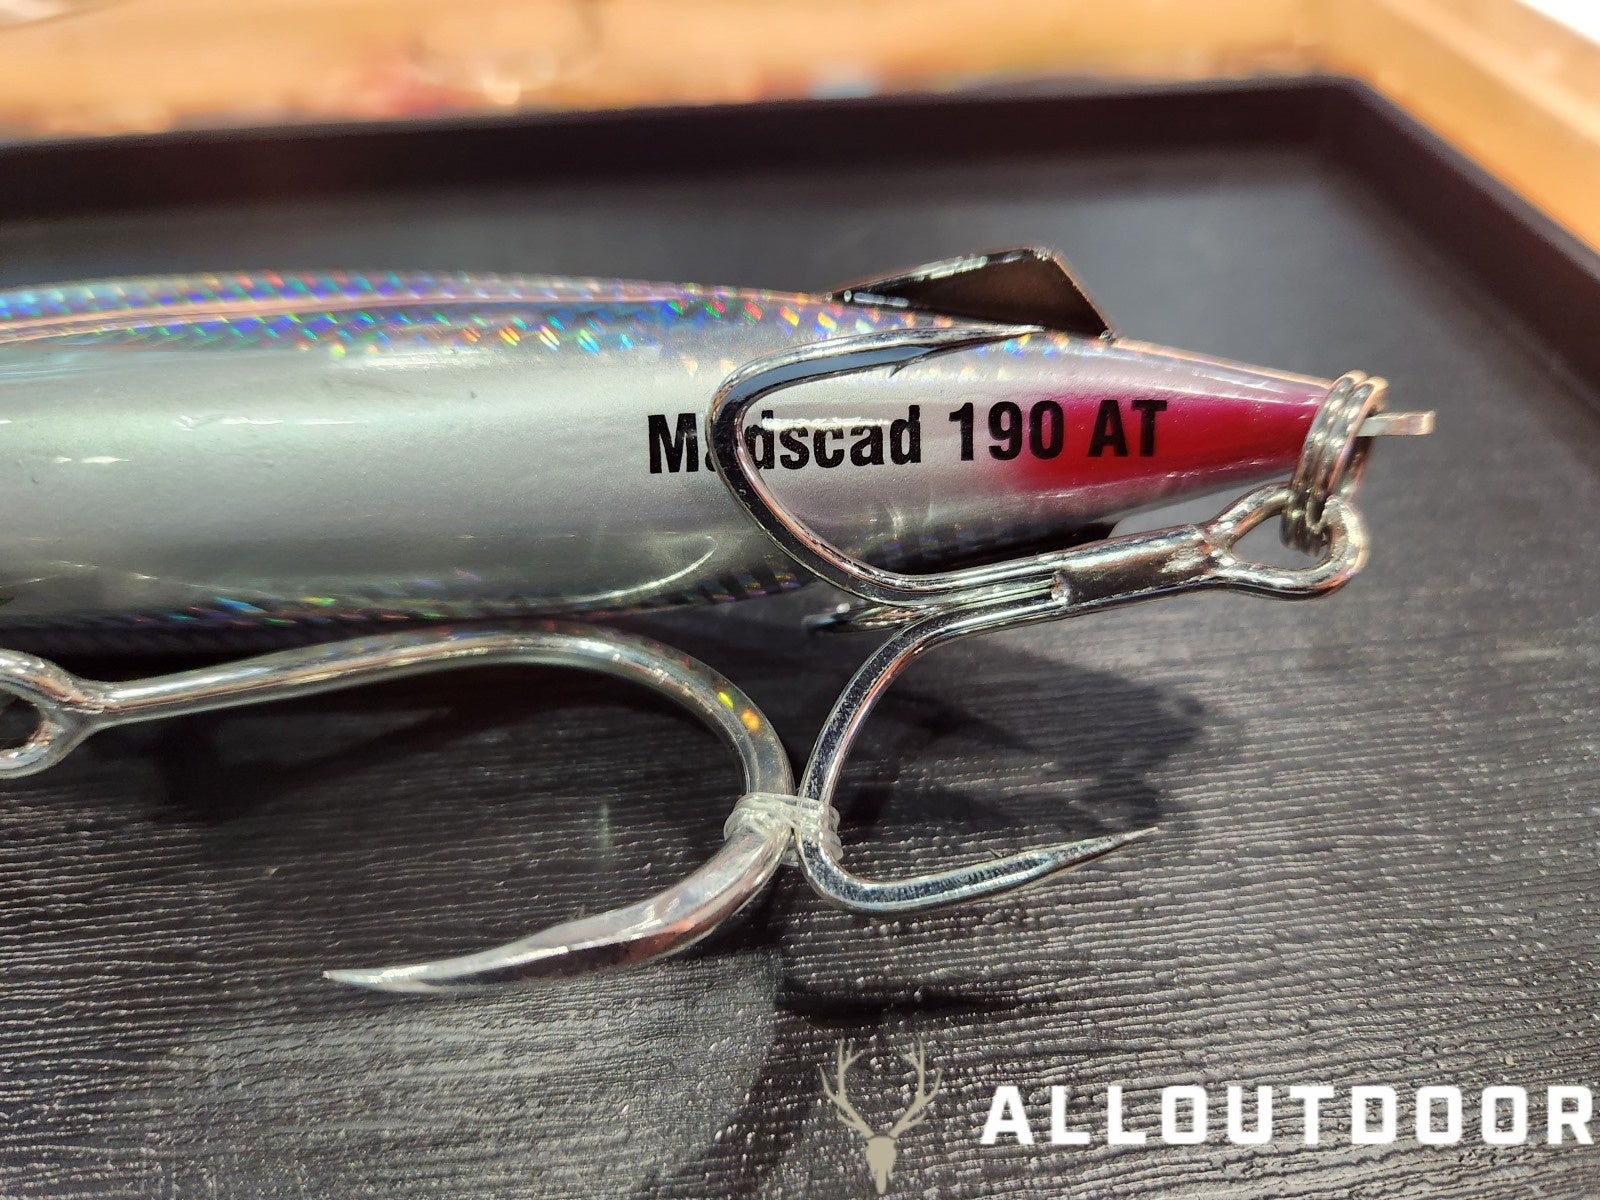 ICAST 2023] Nomad Design's Fastest Trolling Plug - The Madscad 190 AT